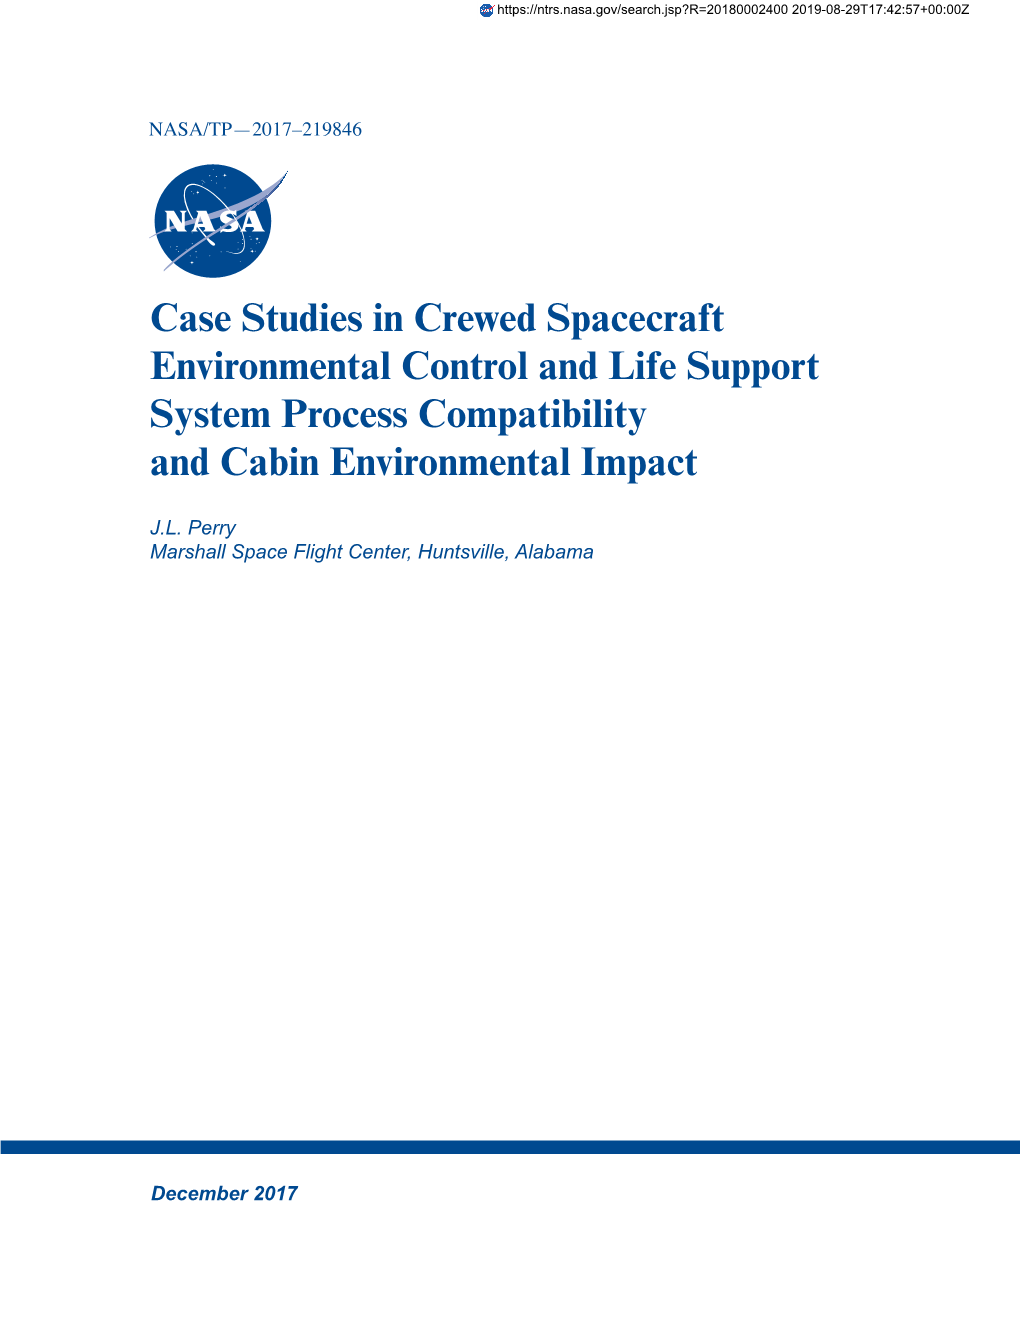 Case Studies in Crewed Spacecraft Environmental Control and Life Support System Process Compatibility and Cabin Environmental Impact